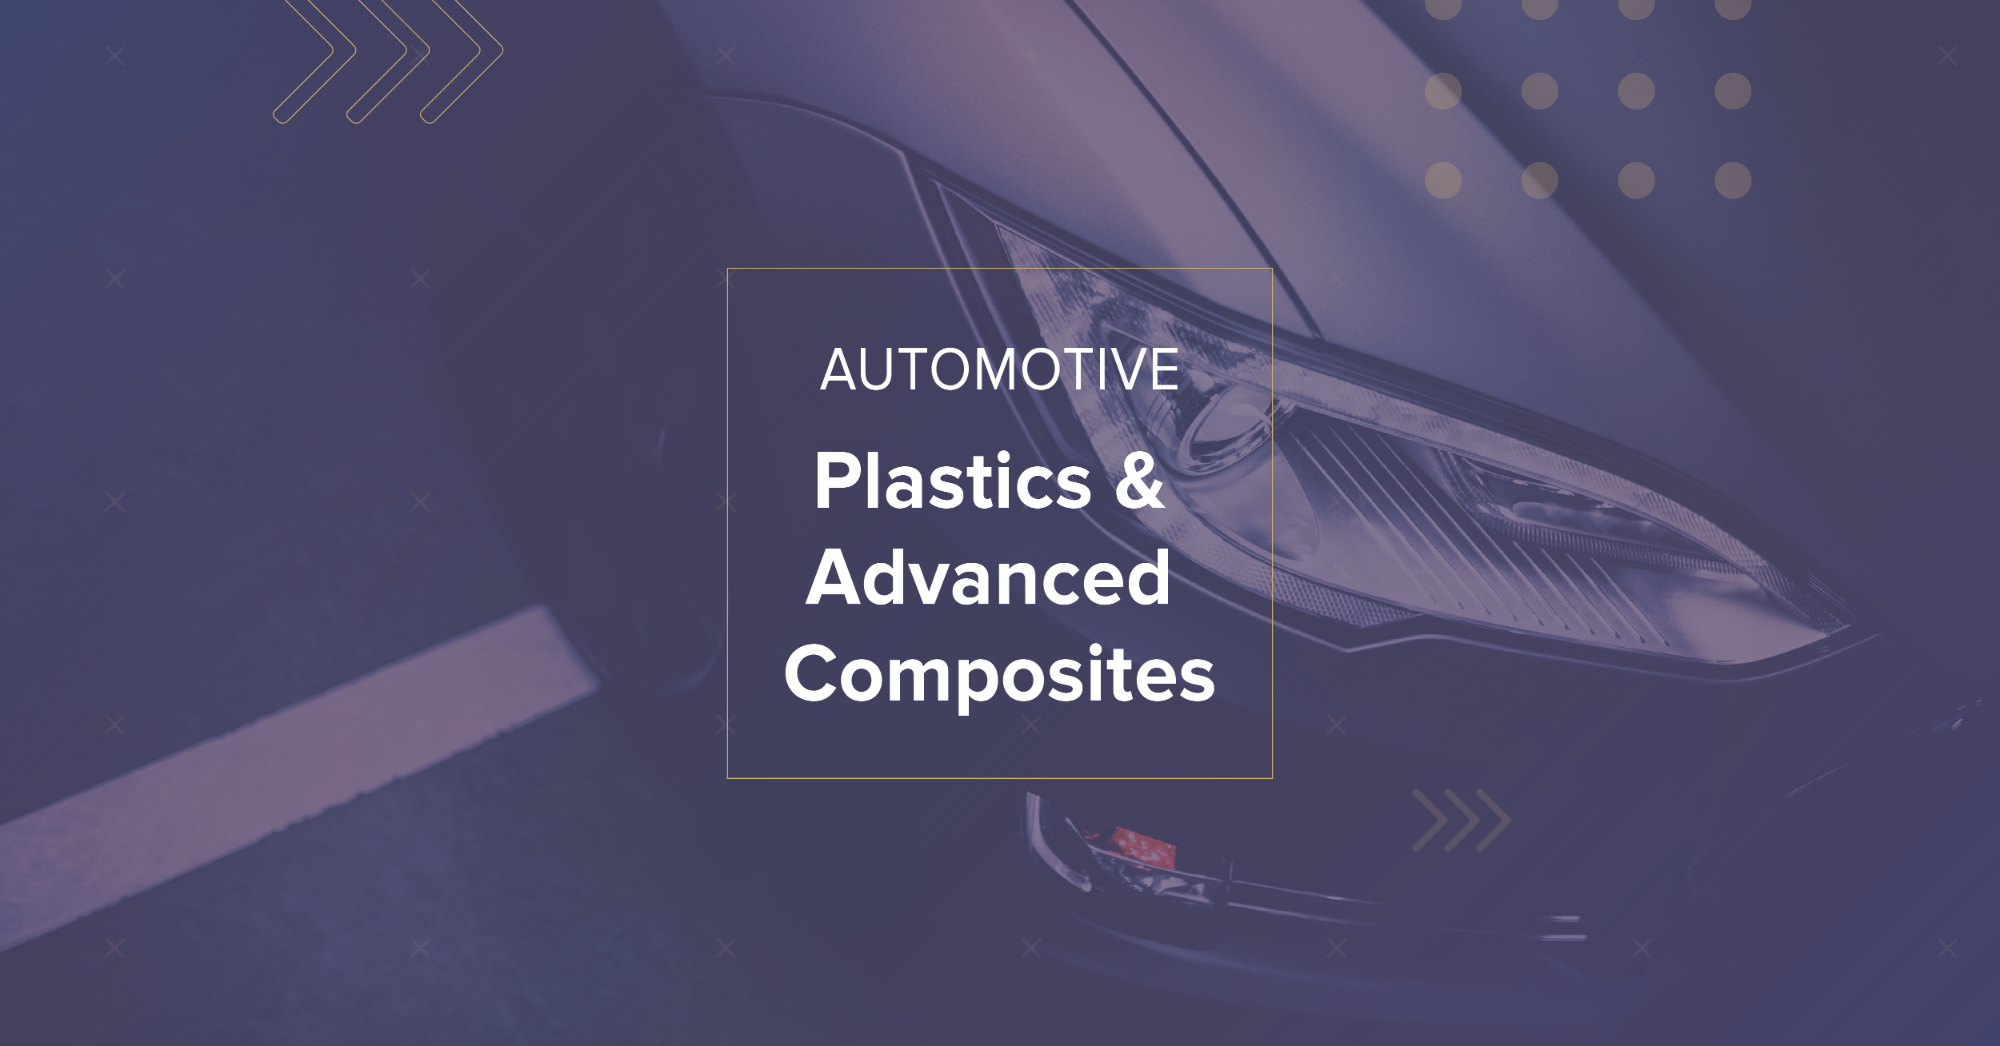 Second day of Triple Automotive event was reserved to our 5th Automotive Plastics & Advanced Composites Summit